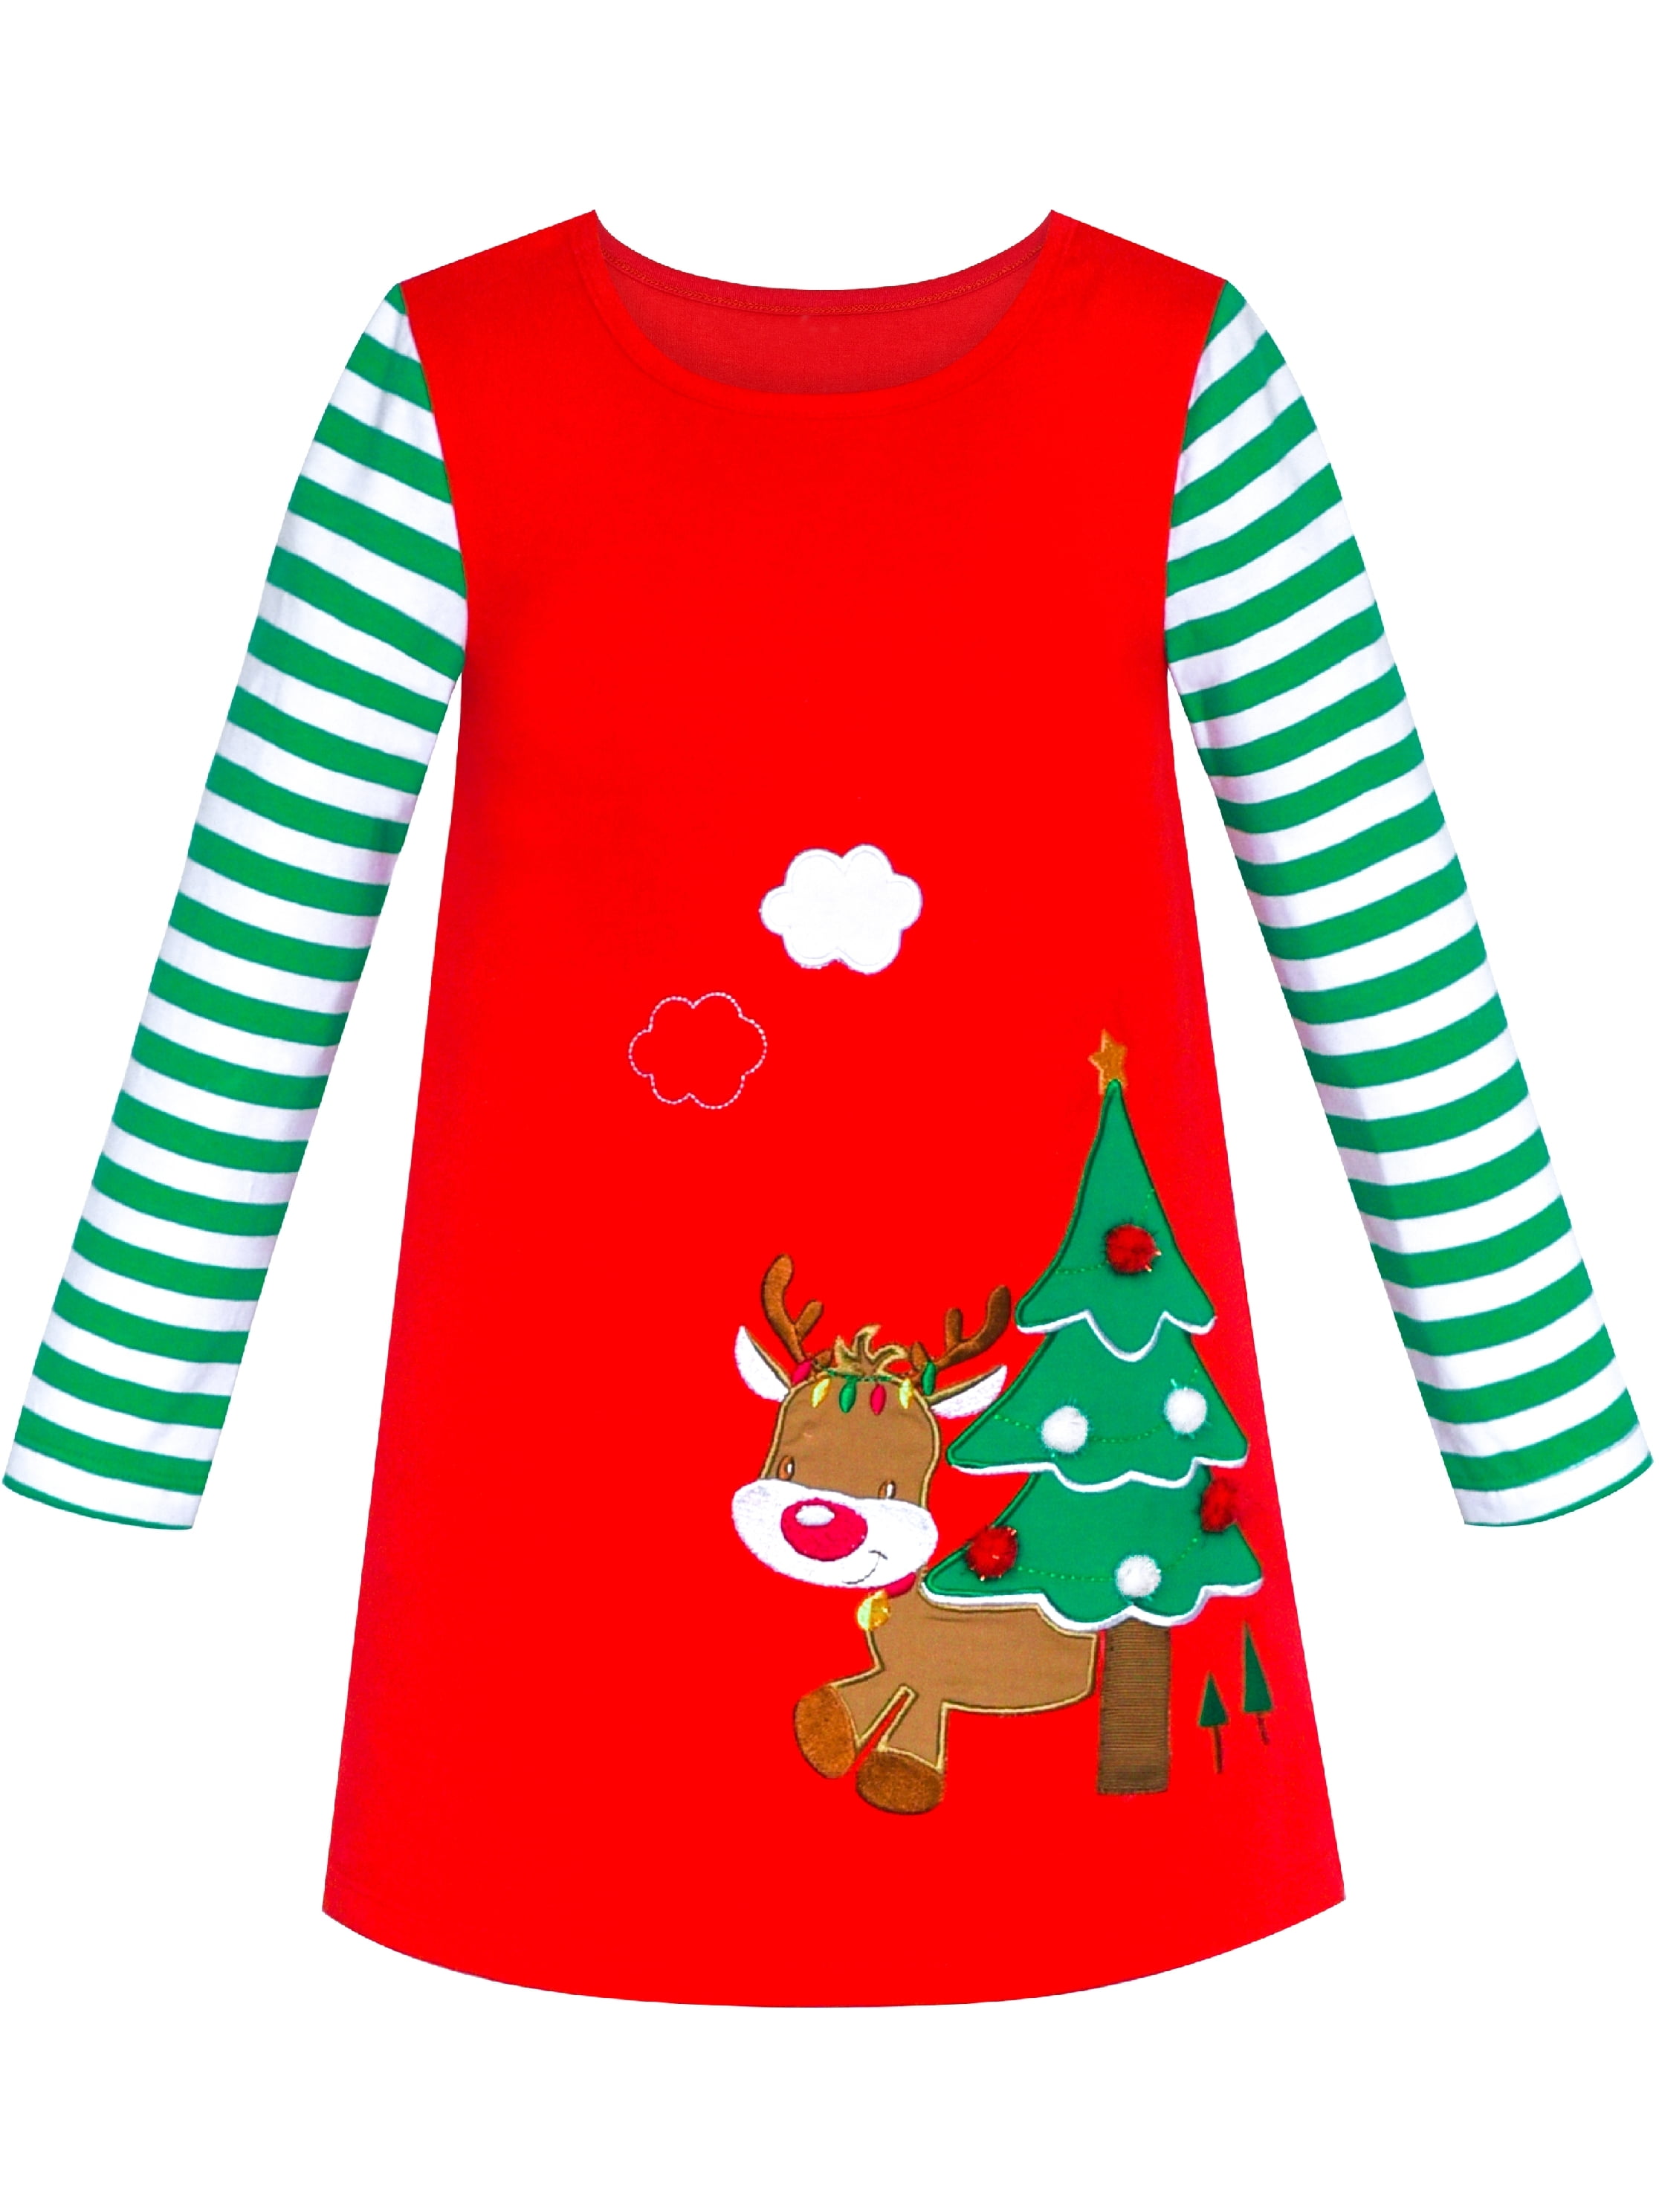 Sunny Fashion Girls Dress Long Sleeve Christmas Snowman Holiday Party Age 5-12 Years